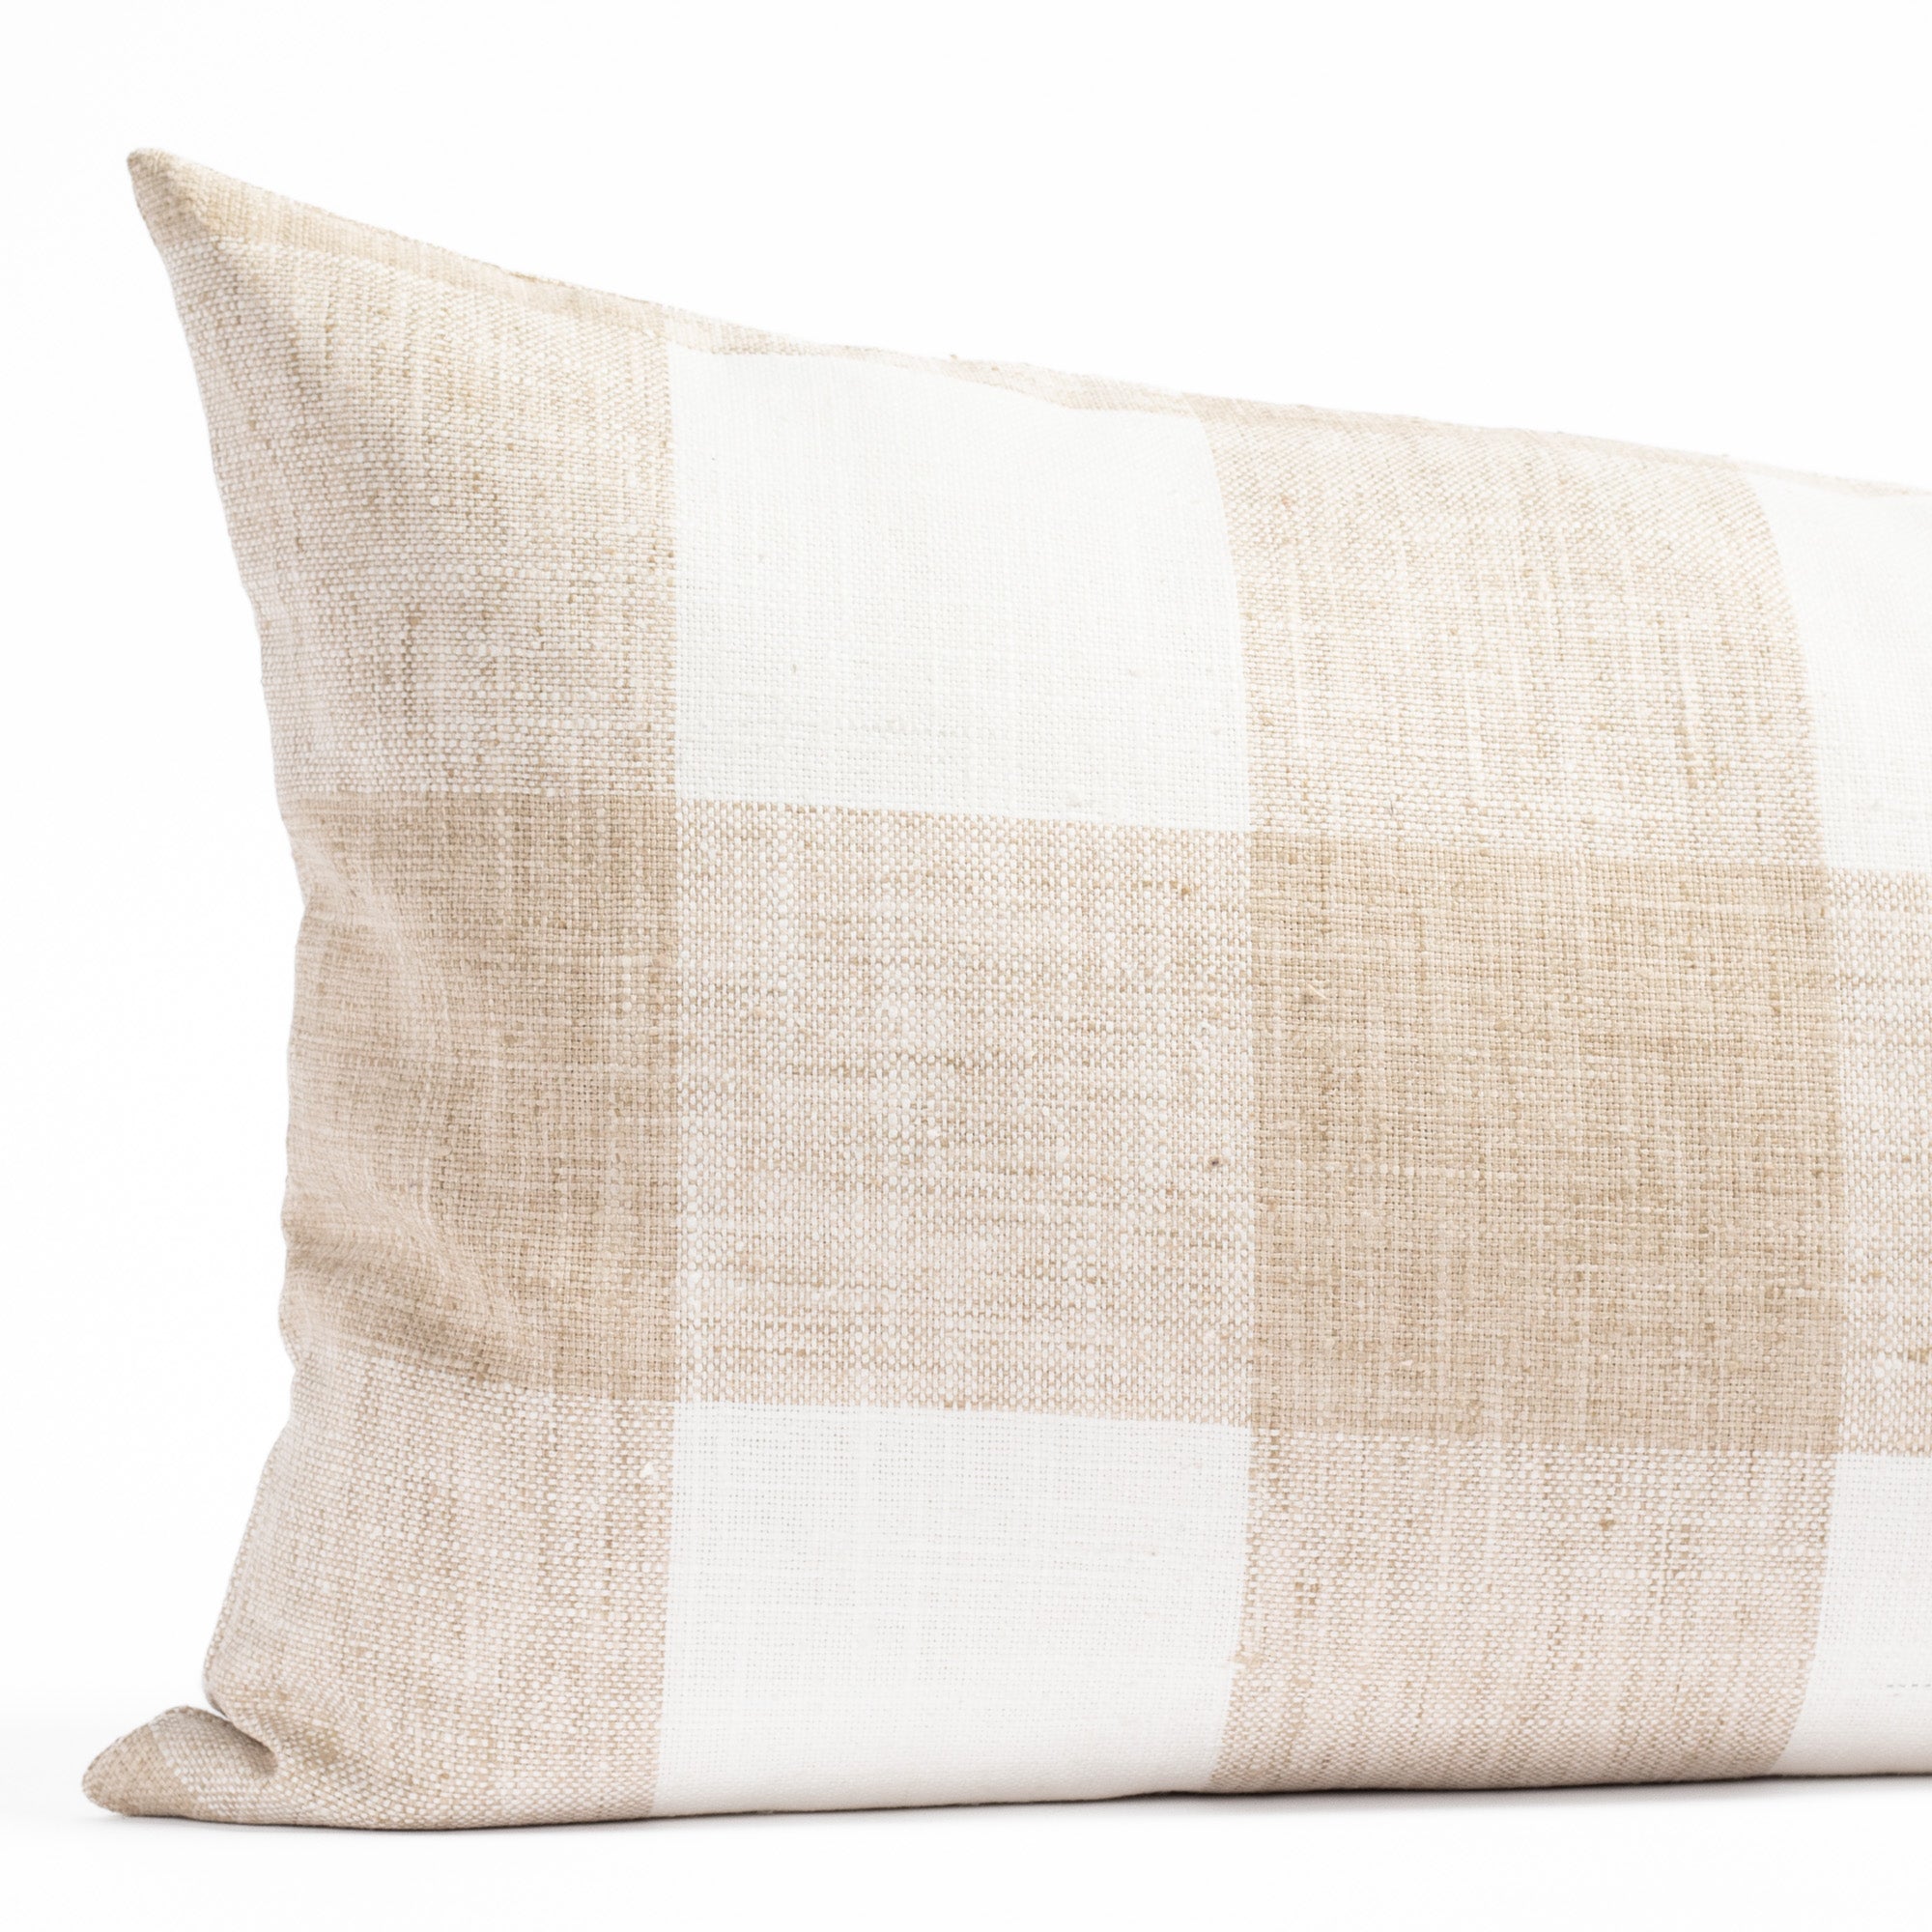 a soft white and sandy beige buffalo check patterned bed bolster pillow from Tonic Living : close up view